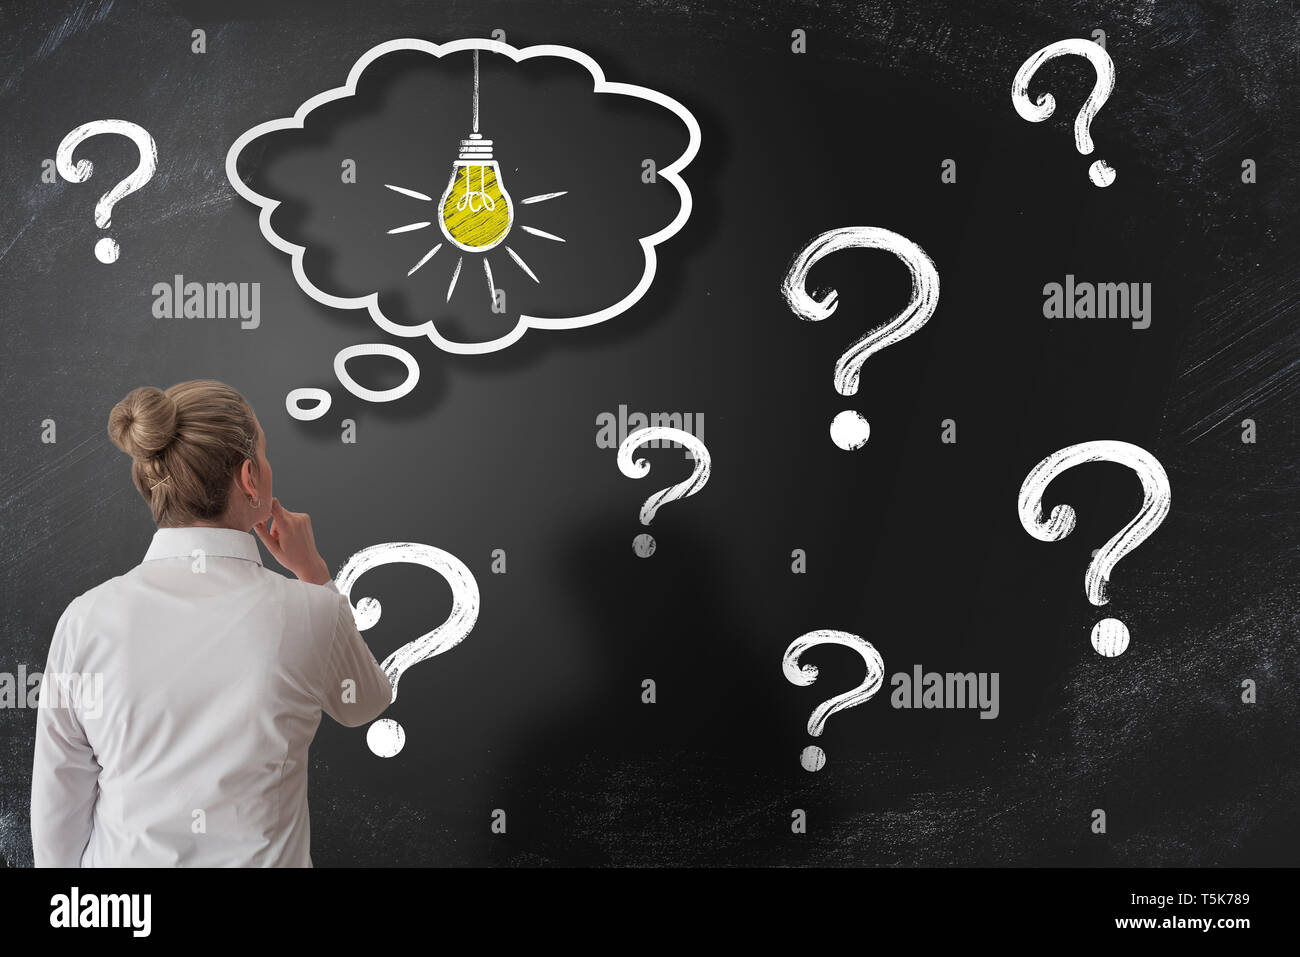 finding solution to problem or answer to question concept with woman looking at chalkboard with question marks while having an idea Stock Photo